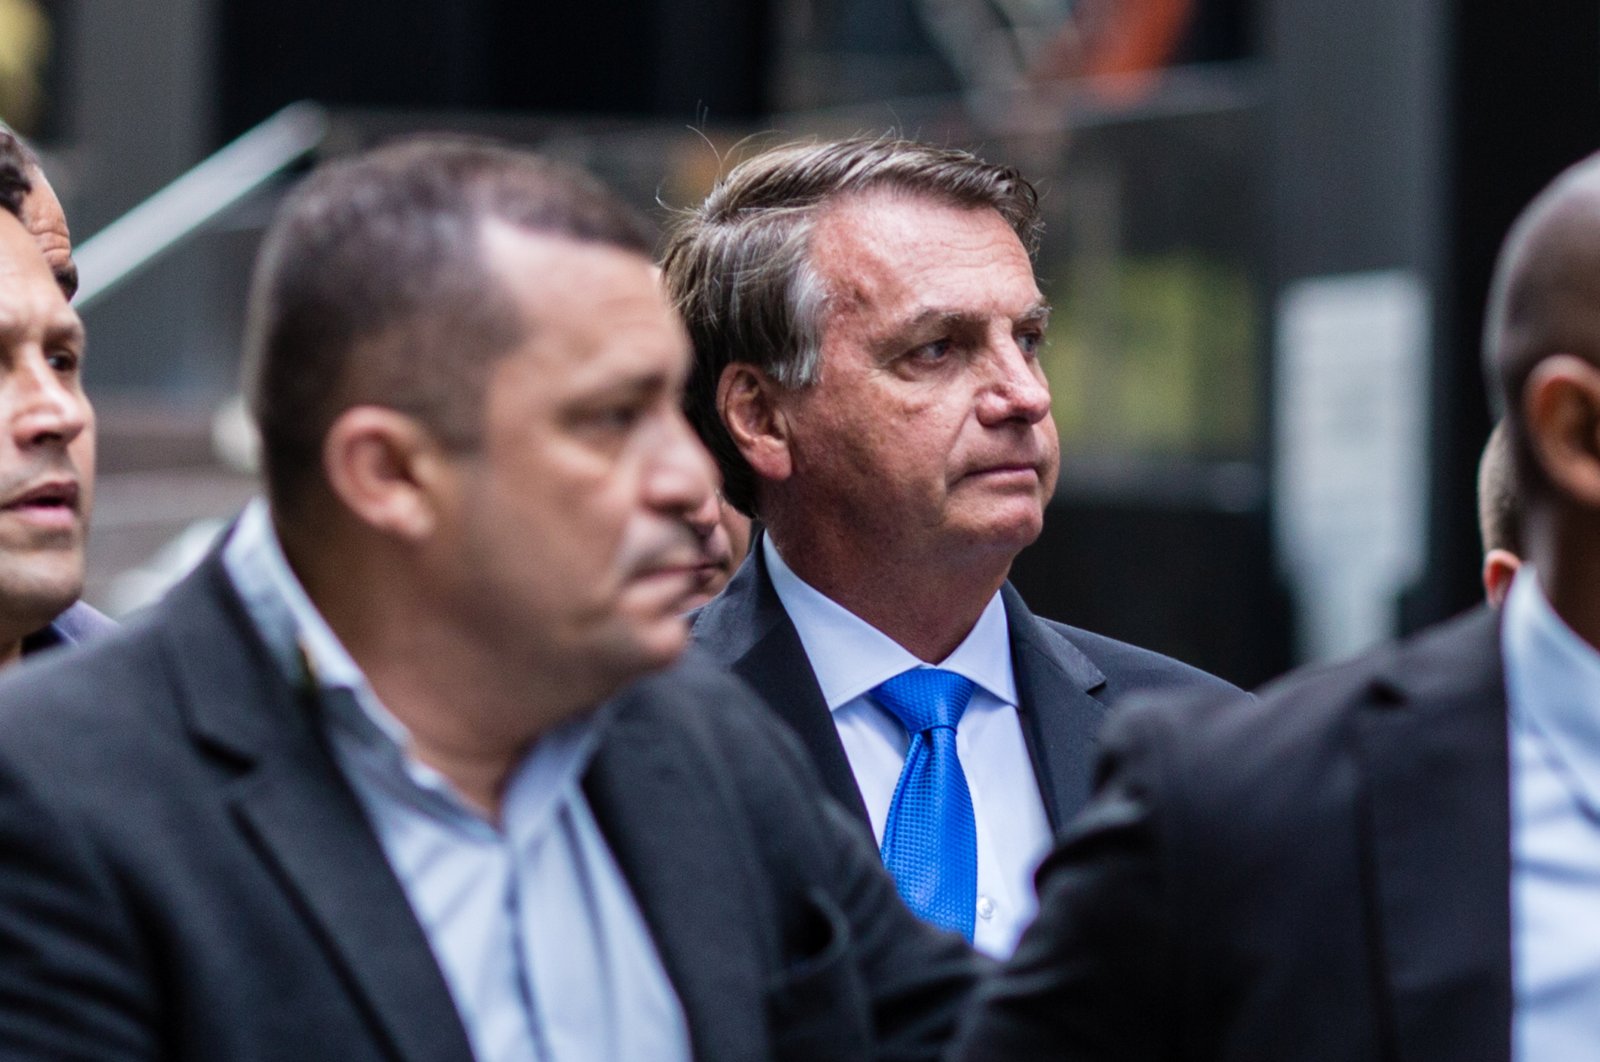 Brazil's President Jair Bolsonaro walks outside his hotel while attending the U.N. General Assembly 76th session General Debate at the United Nations, in New York City, U.S., Sept. 20, 2021. (Reuters Photo)